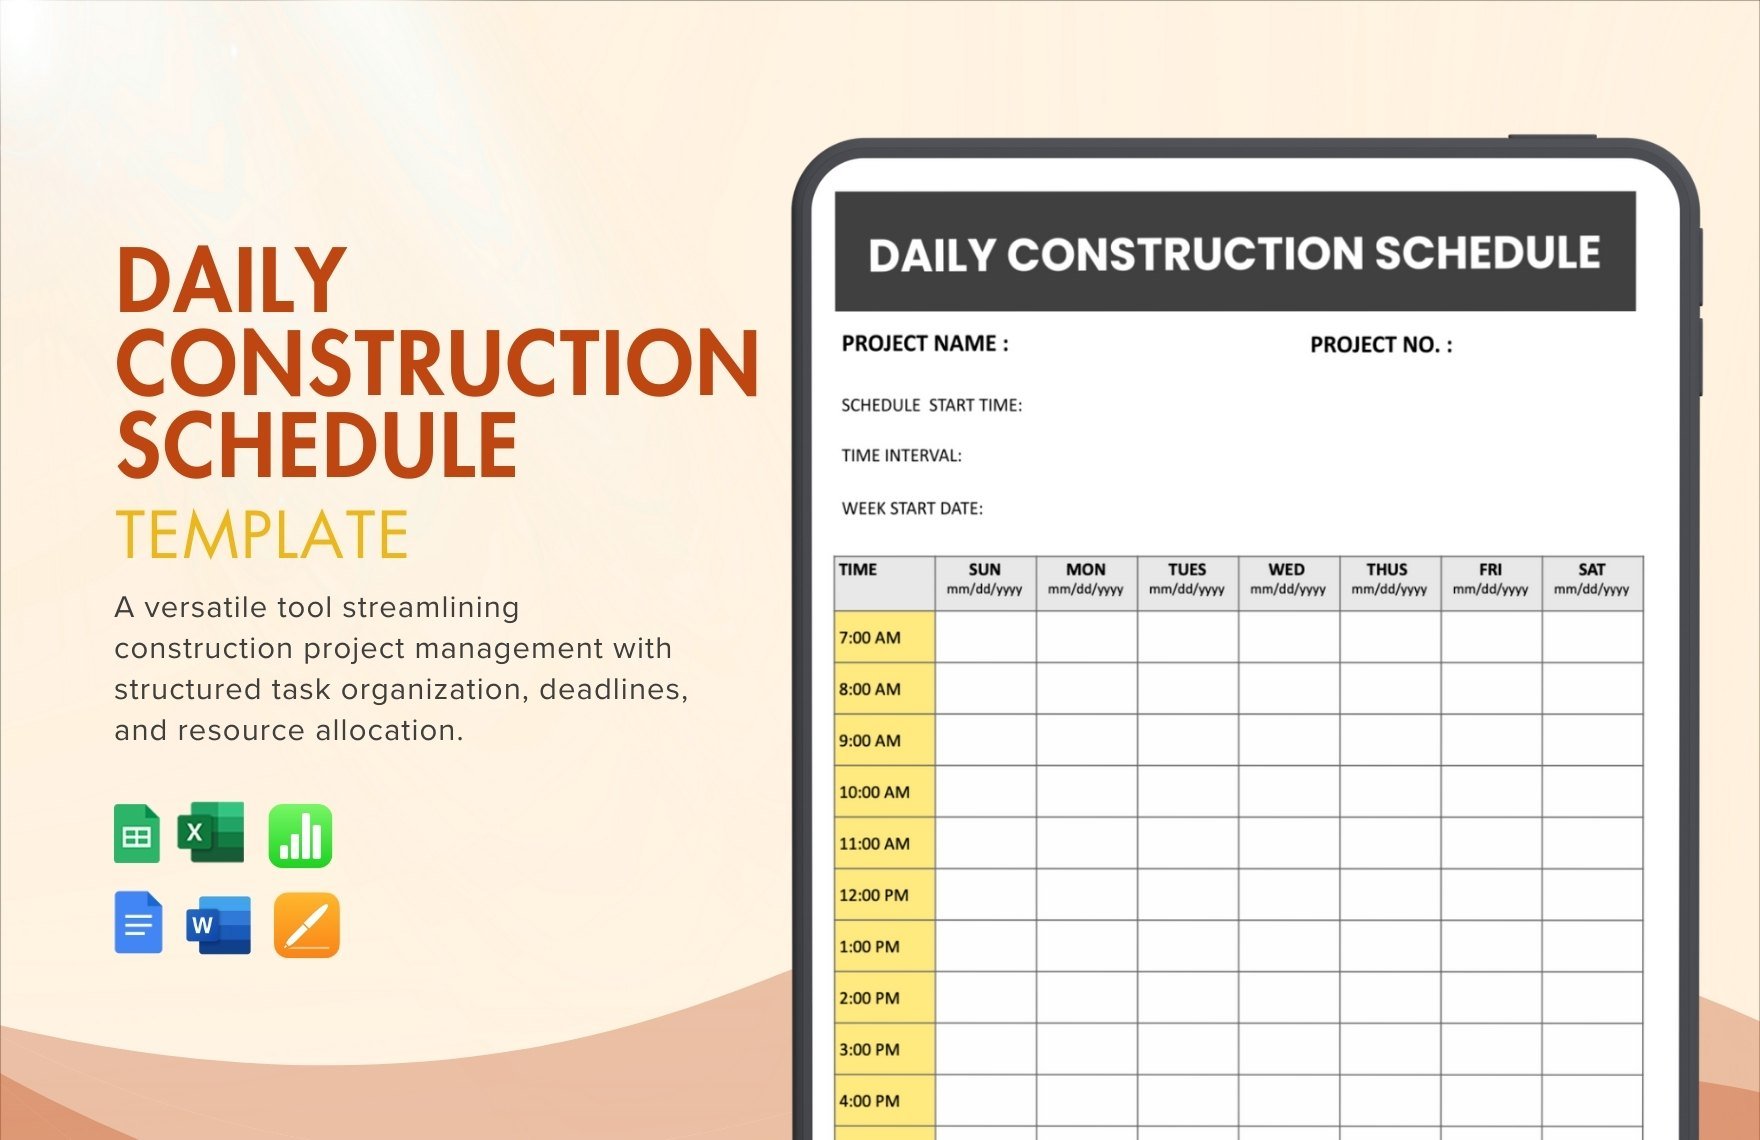 Daily Construction Schedule Template in Word, Google Docs, Excel, Google Sheets, Apple Pages, Apple Numbers